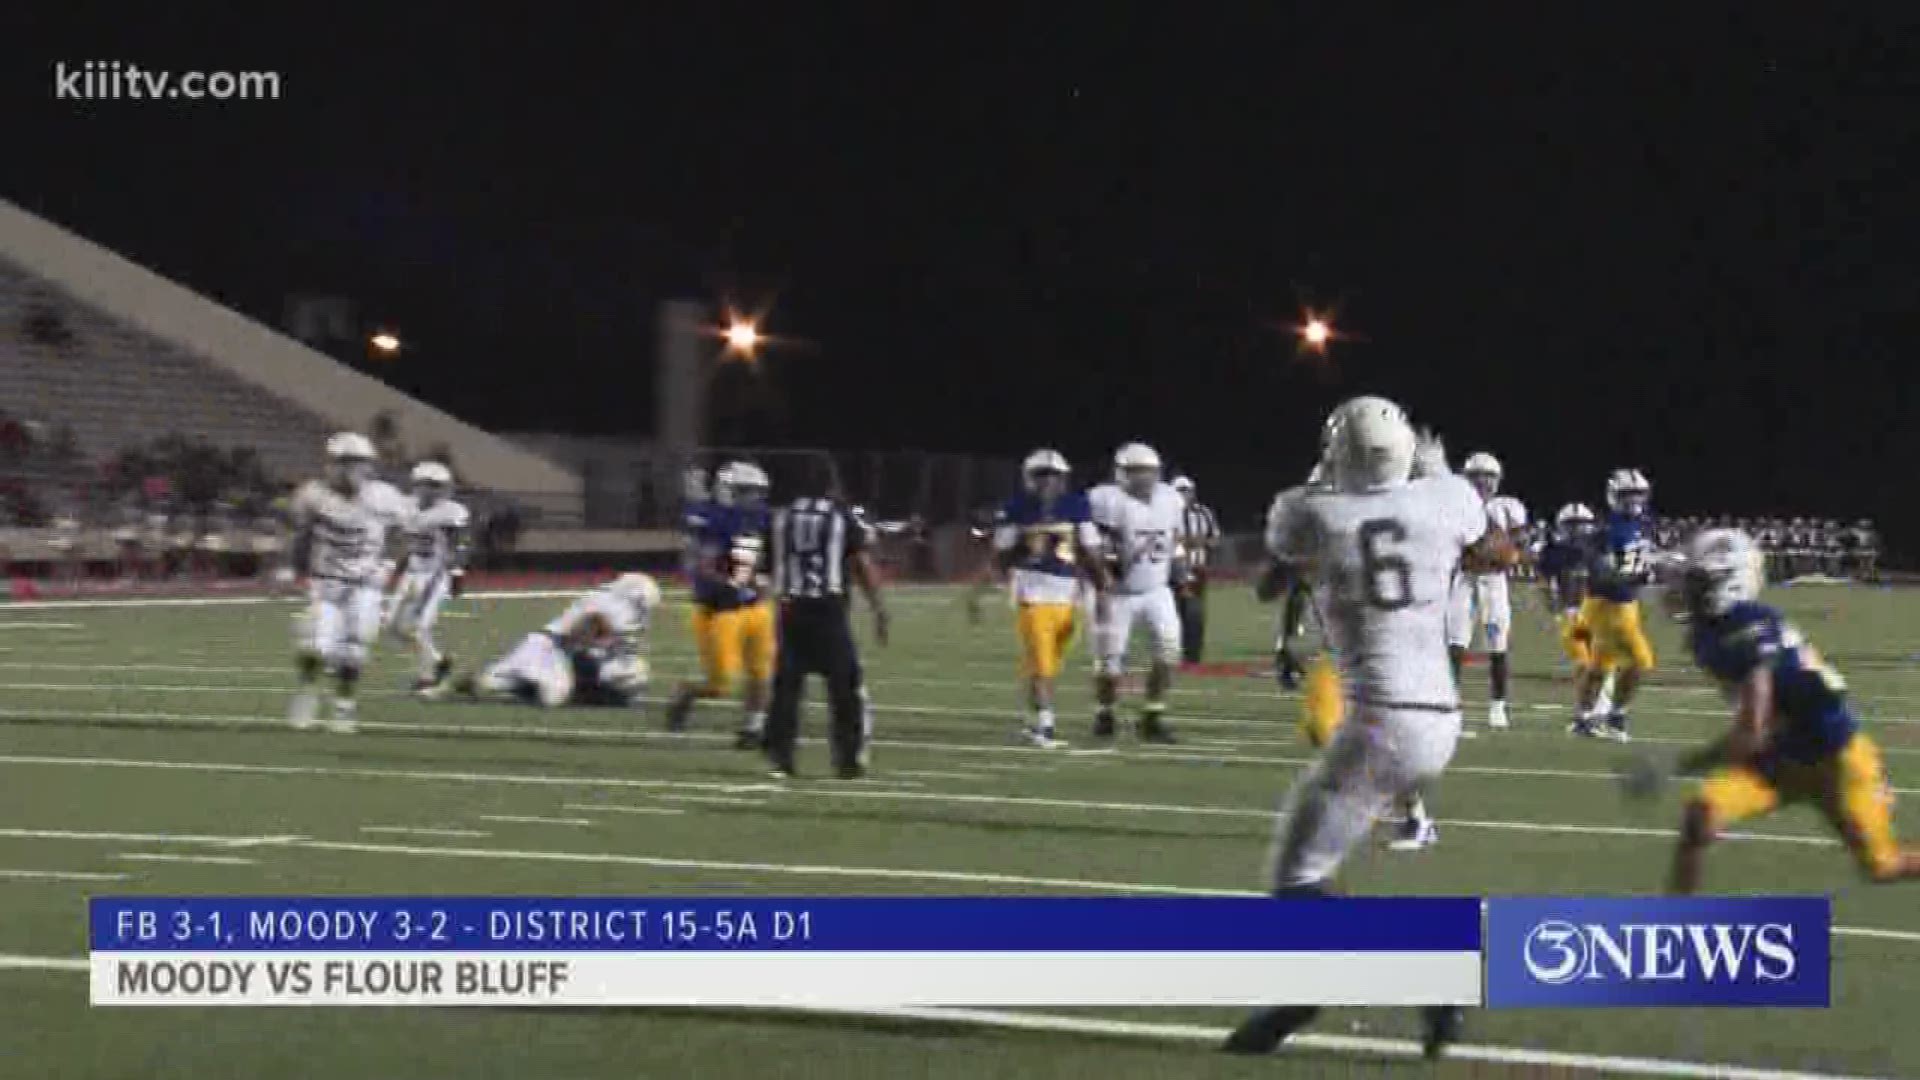 Flour Bluff topped Moody in a Thursday night District 15-5A DI matchup 43-21.